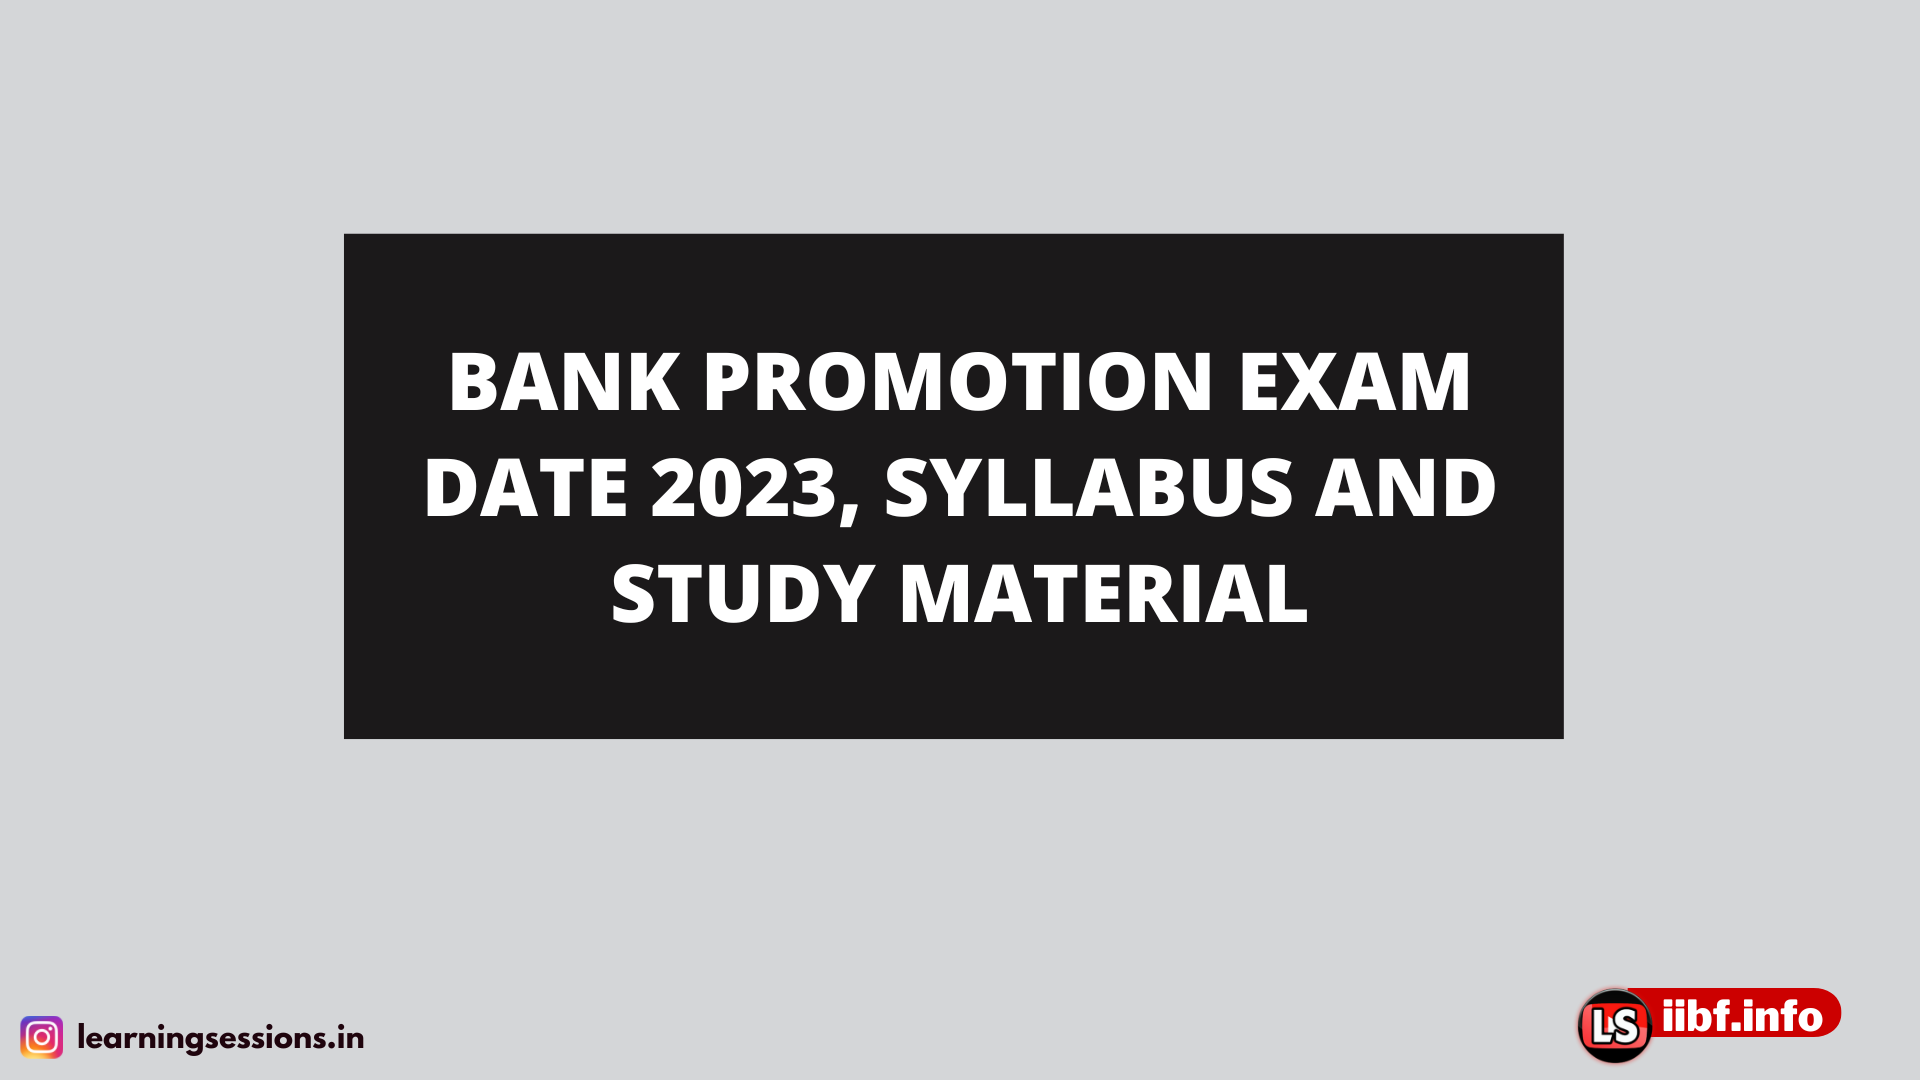 BANK PROMOTION EXAM DATE 2022, SYLLABUS AND STUDY MATERIAL